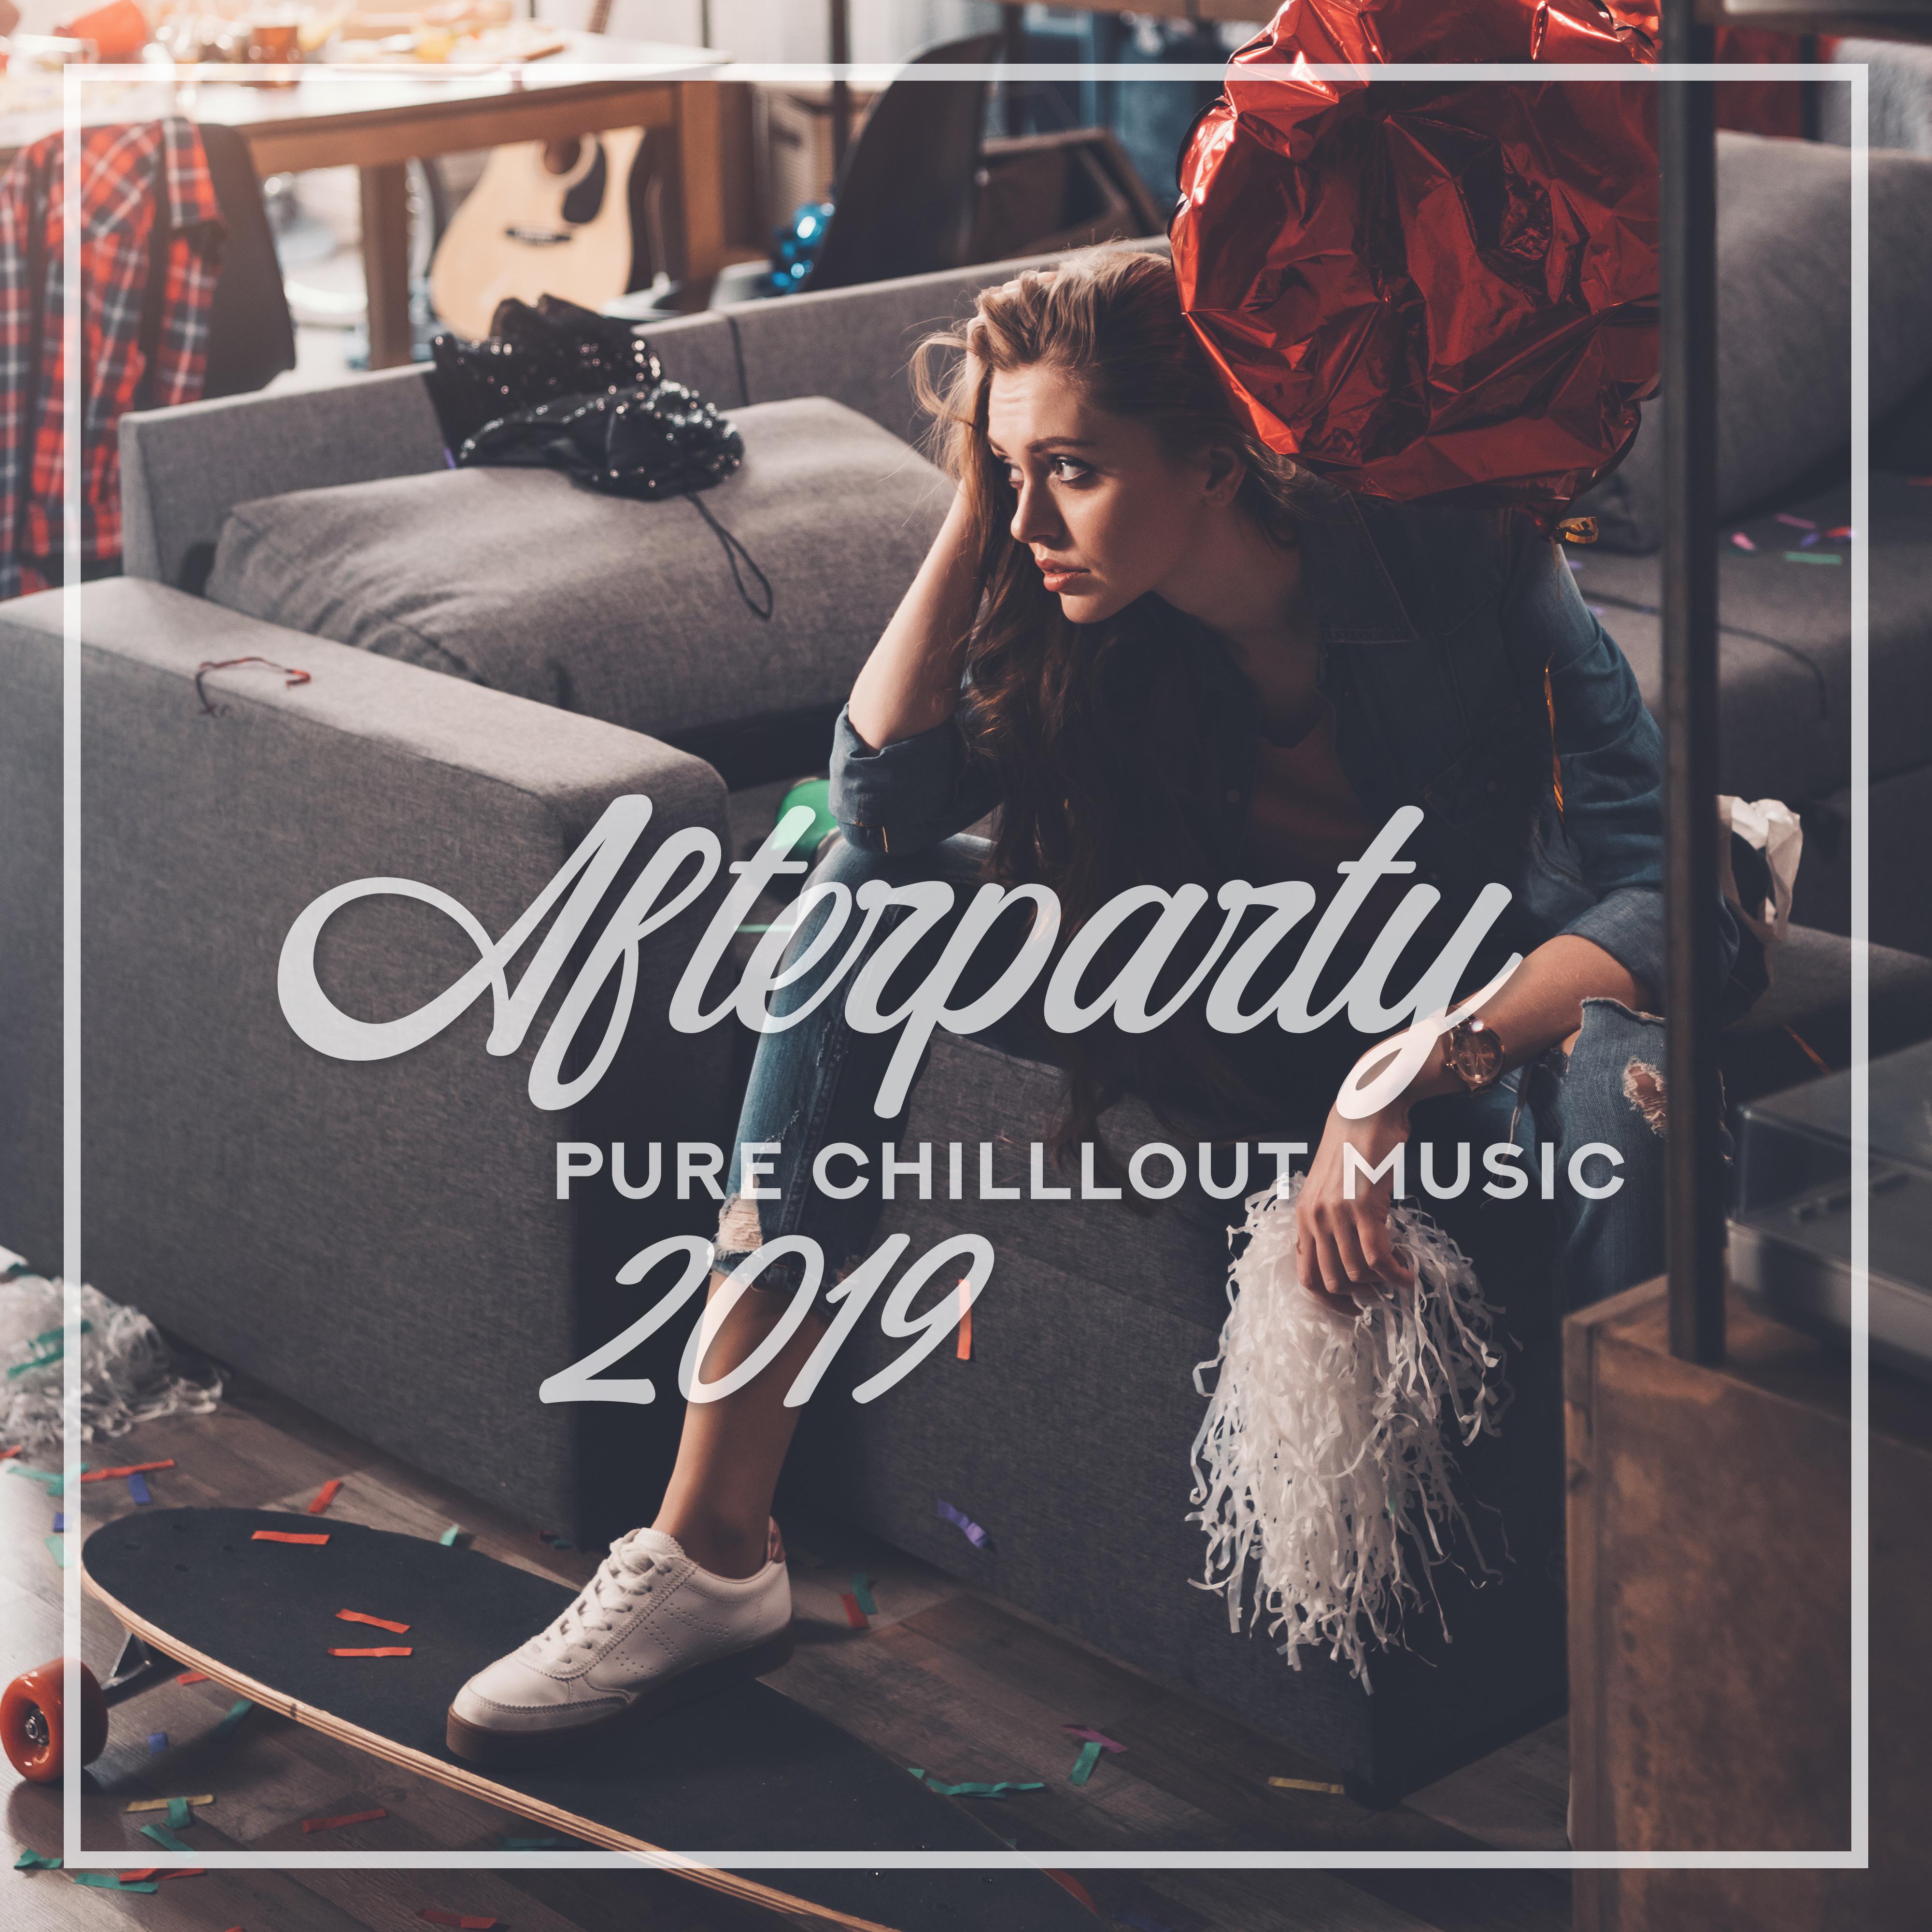 Afterparty Pure Chilllout Music 2019: Fully Relaxing Electronic Music, Perfect Rest After Long Night, Summer Good Vibes Only